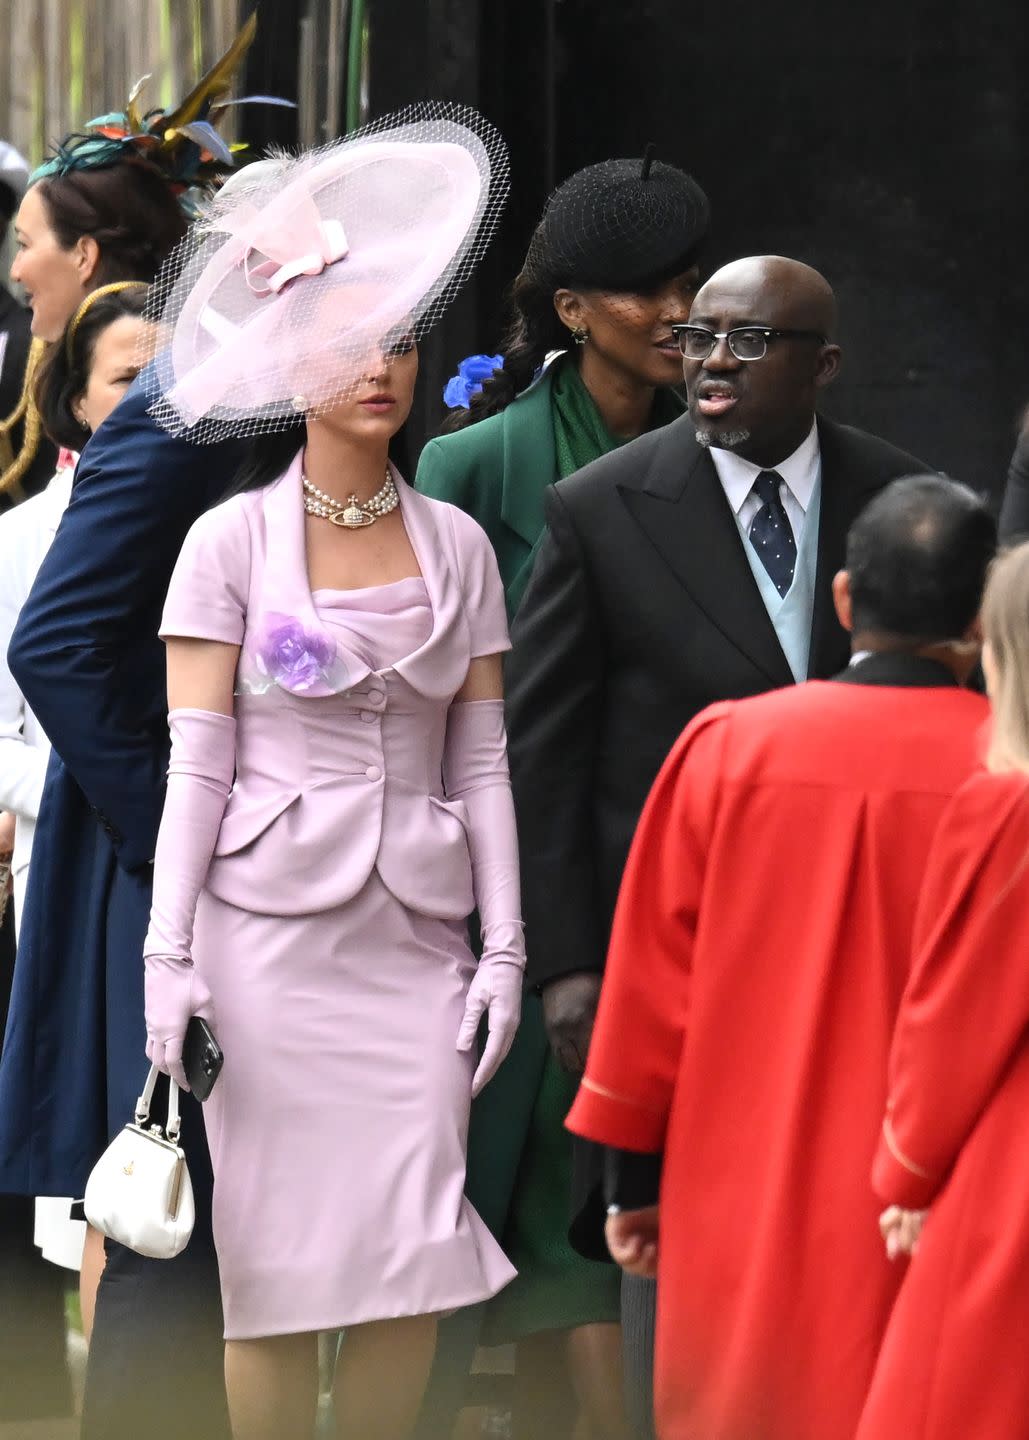 london, england may 06 katy perry and edward enninful arrive at westminster abbey ahead of the coronation of king charles iii and queen camilla on may 06, 2023 in london, england the coronation of charles iii and his wife, camilla, as king and queen of the united kingdom of great britain and northern ireland, and the other commonwealth realms takes place at westminster abbey today charles acceded to the throne on 8 september 2022, upon the death of his mother, elizabeth ii photo by jeff spicergetty images